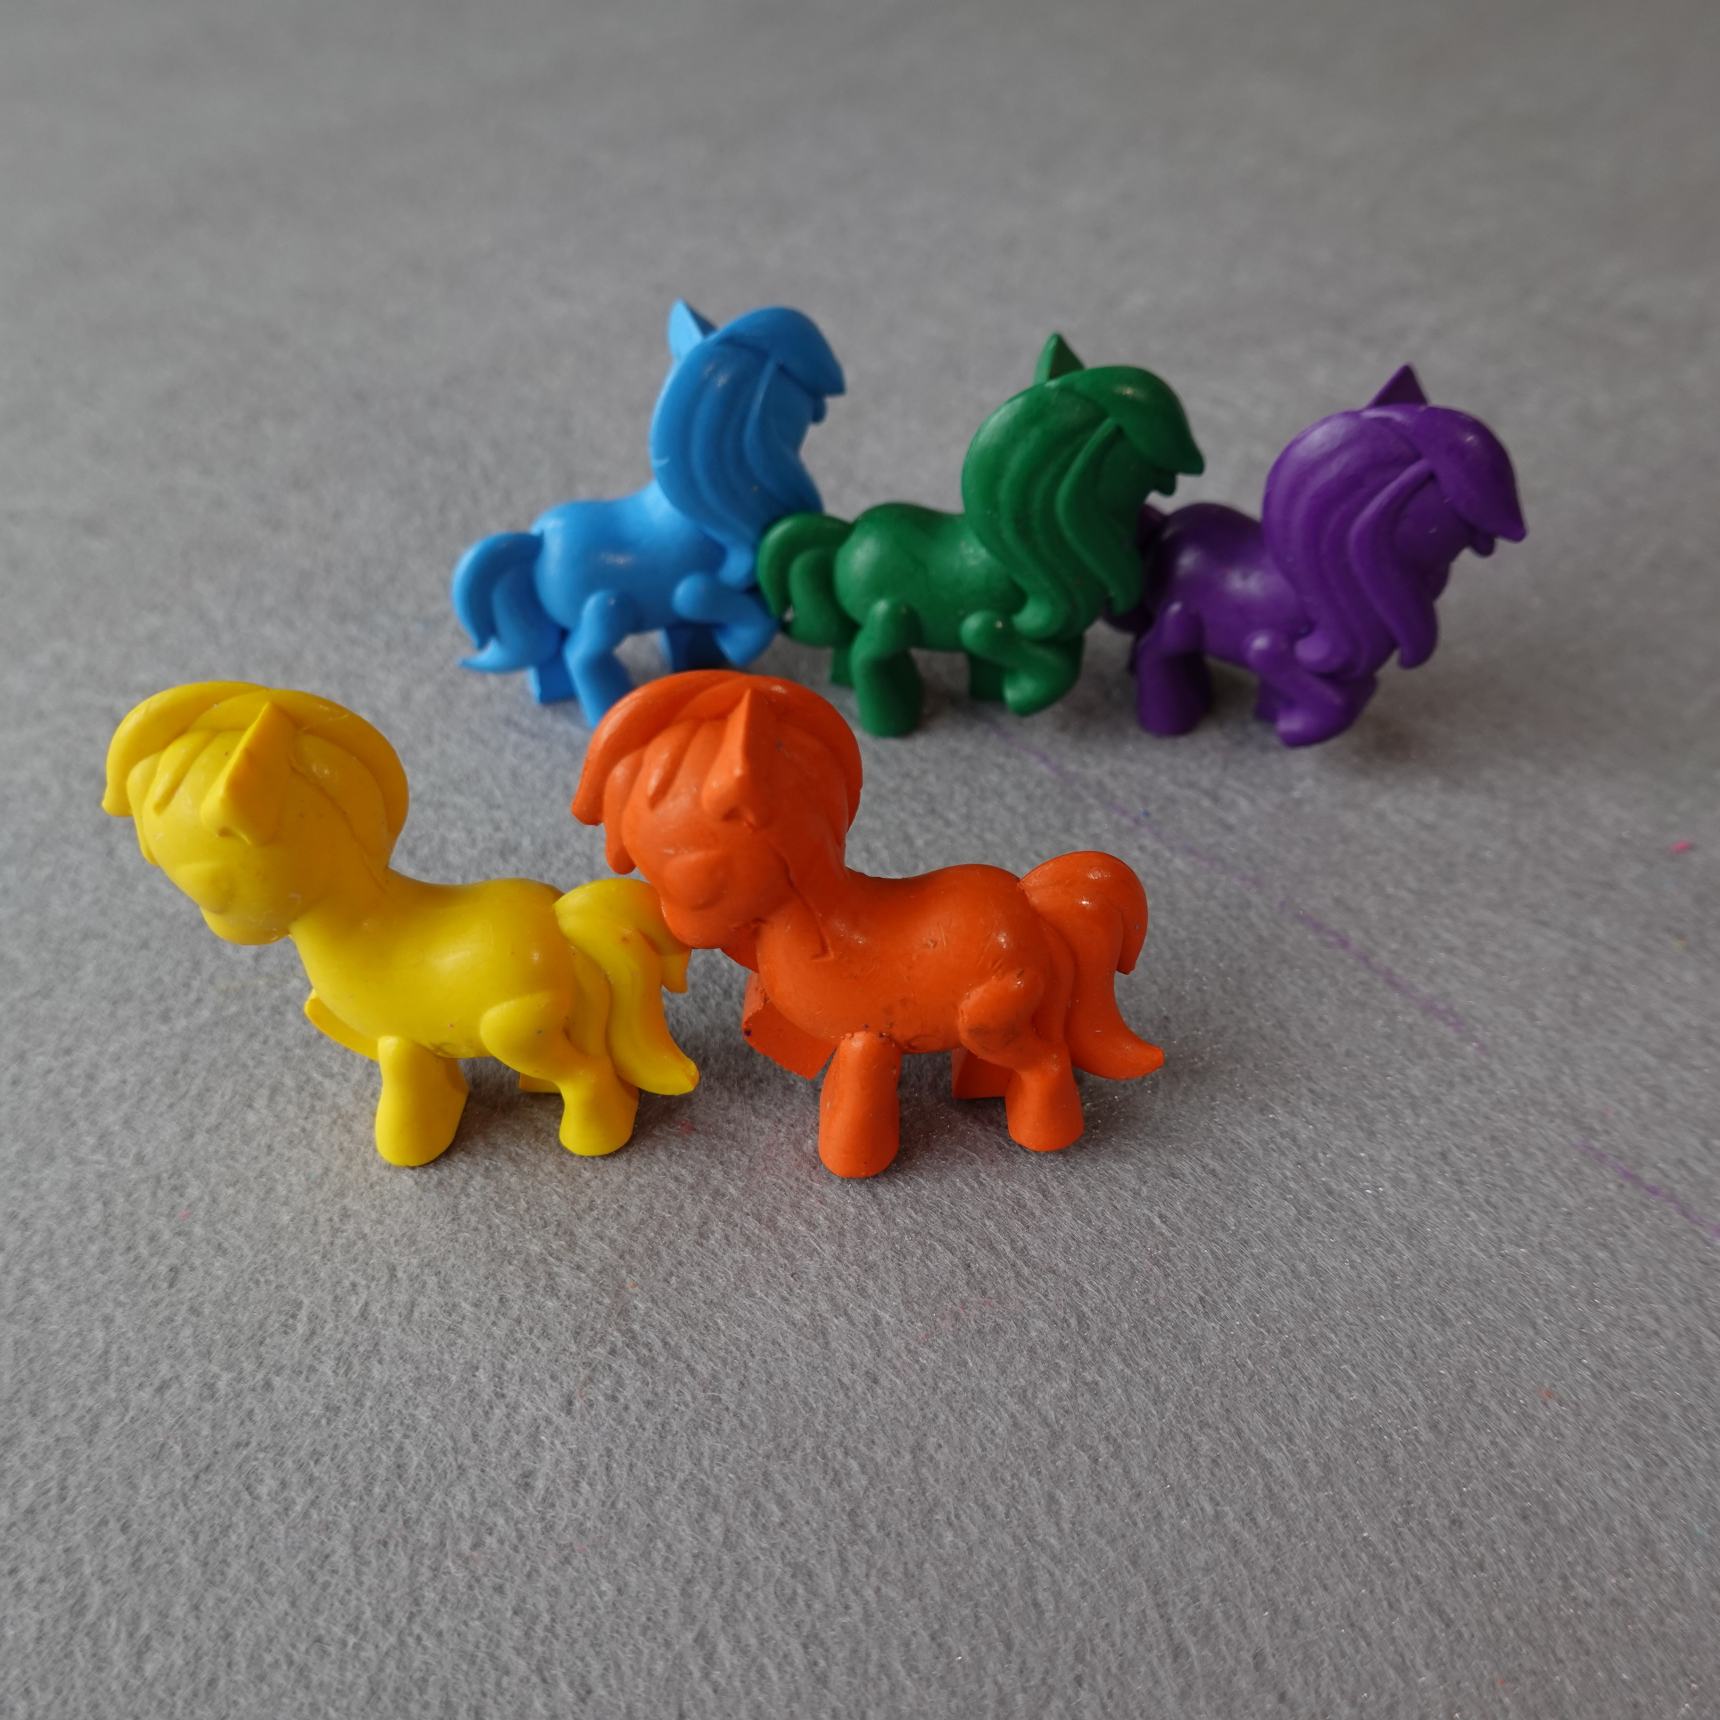 Top selling 12 pcs kids crayons painting 3D egg shape plastic crayons